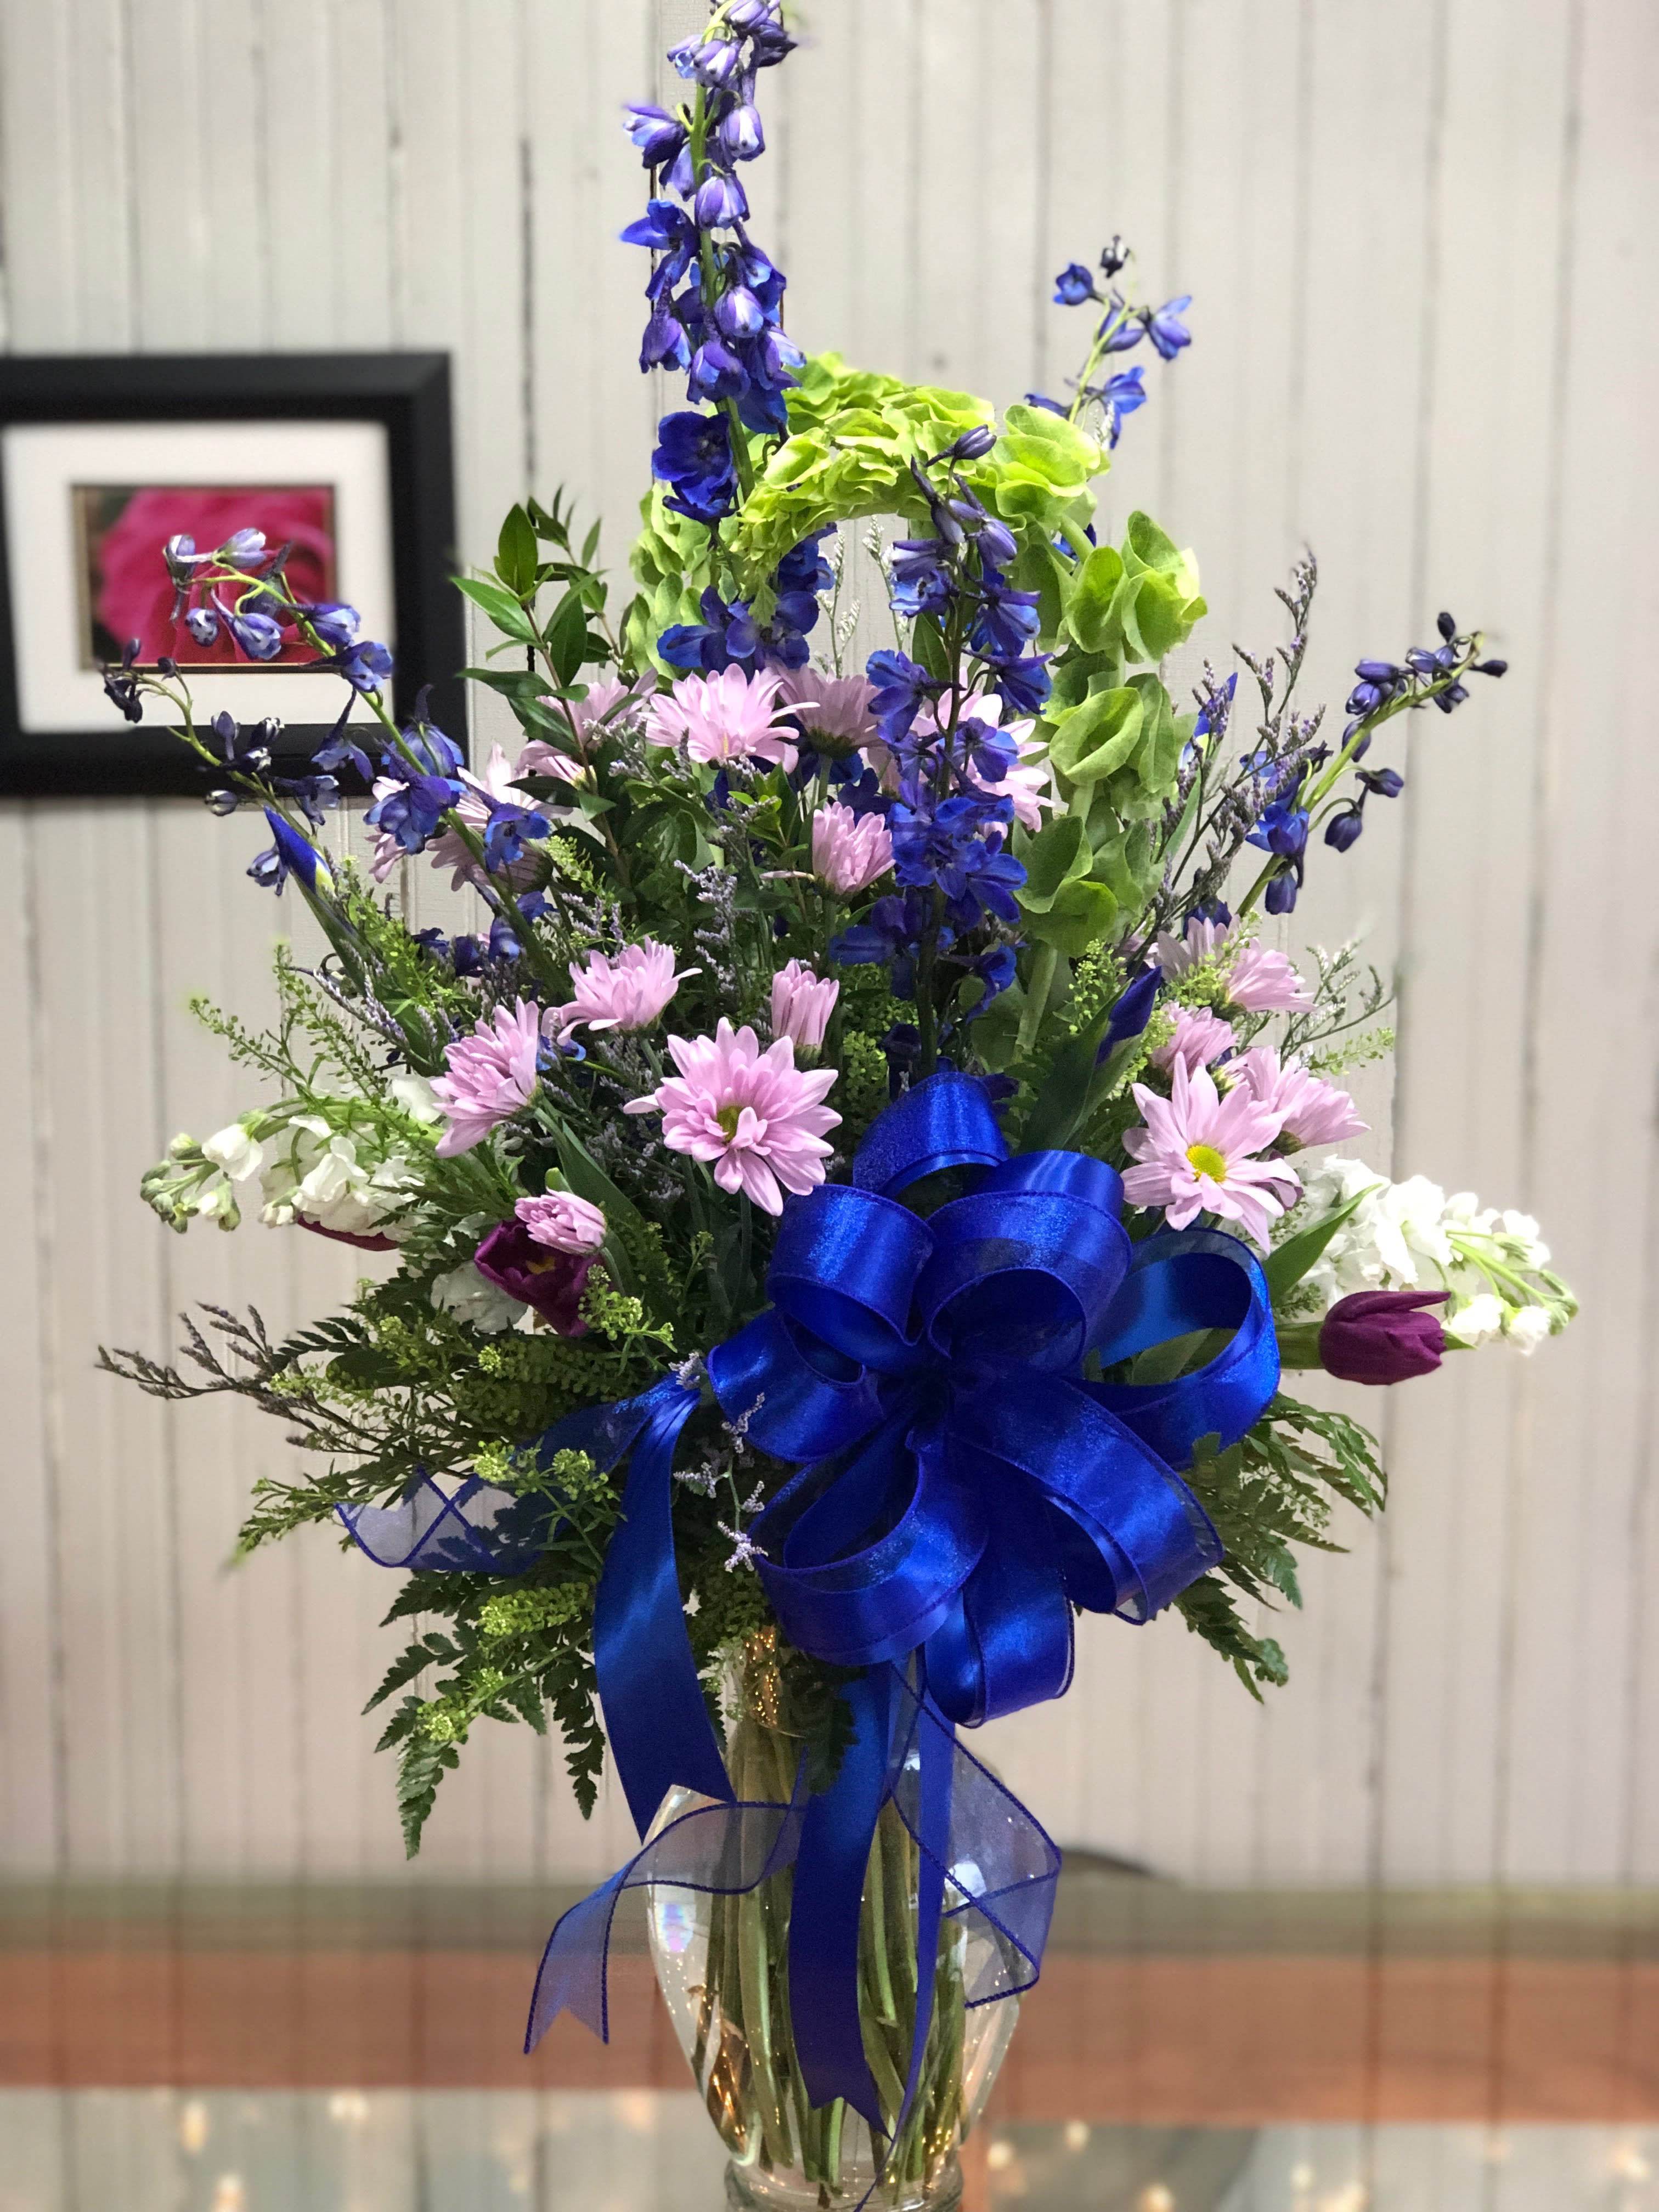 Remember Me - This is a grand arrangement of blue delphinium, bells of Ireland, and purple daisies and accents, in a clear glass vase.   ****We will try our best to match the flowers in the picture, but there may be times when we substitute flowers.  We will always try to make it have the same look and feel as the original.